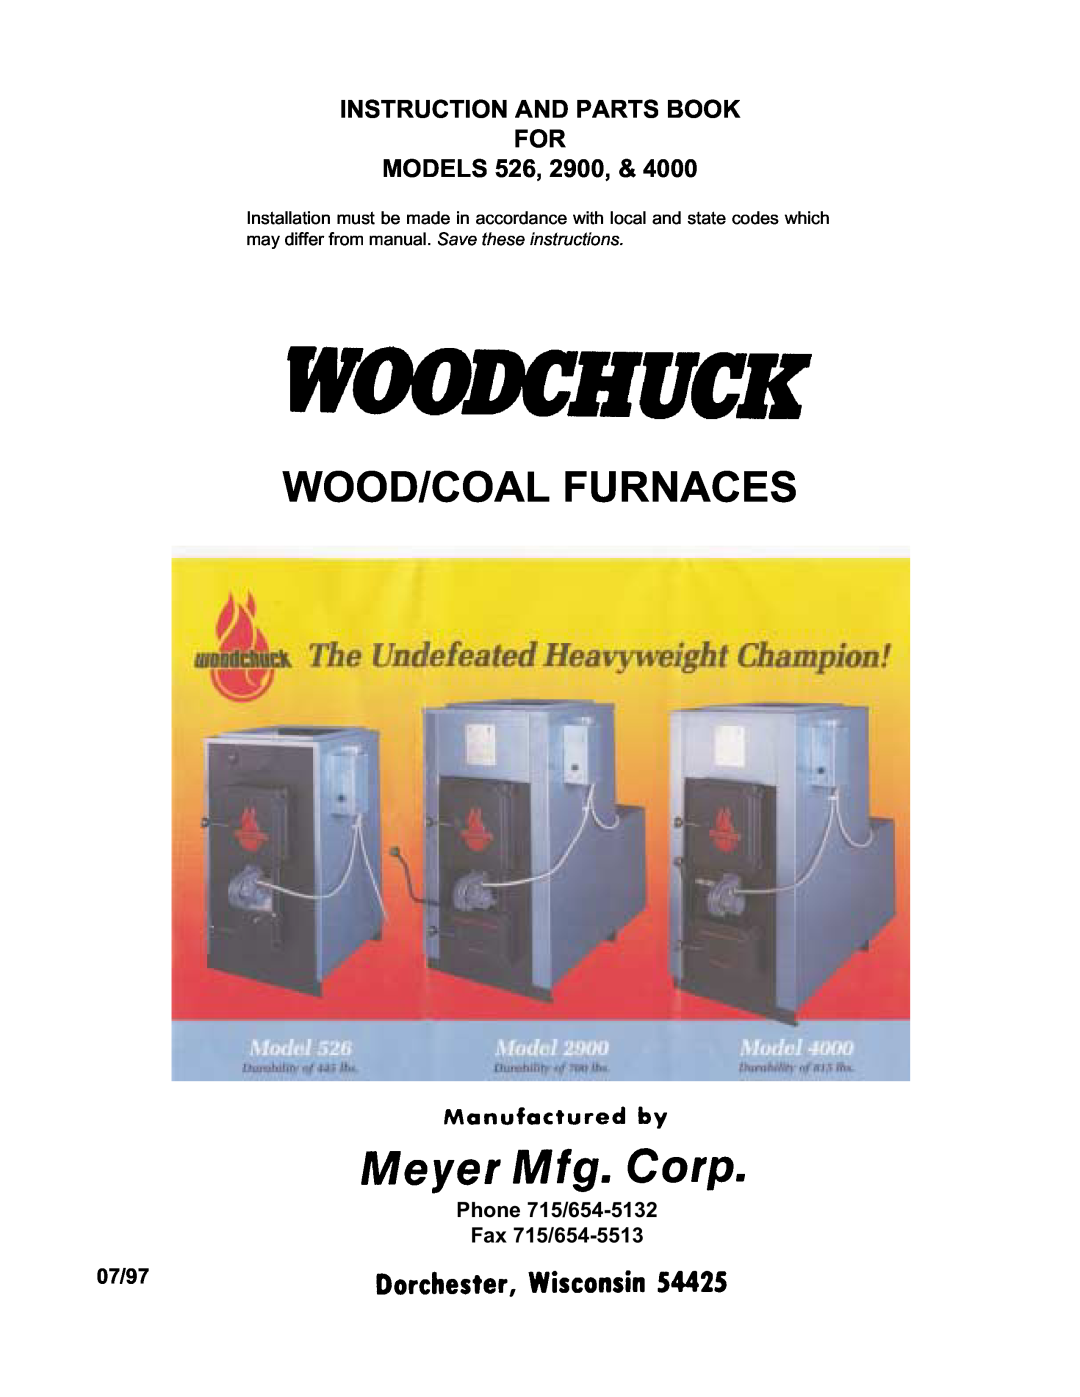 Meyer woodchuck, 526, 2900, 4000 manual Instruction And Parts Book For, Models, Phone 715/654-5132 Fax 715/654-5513, 07/97 